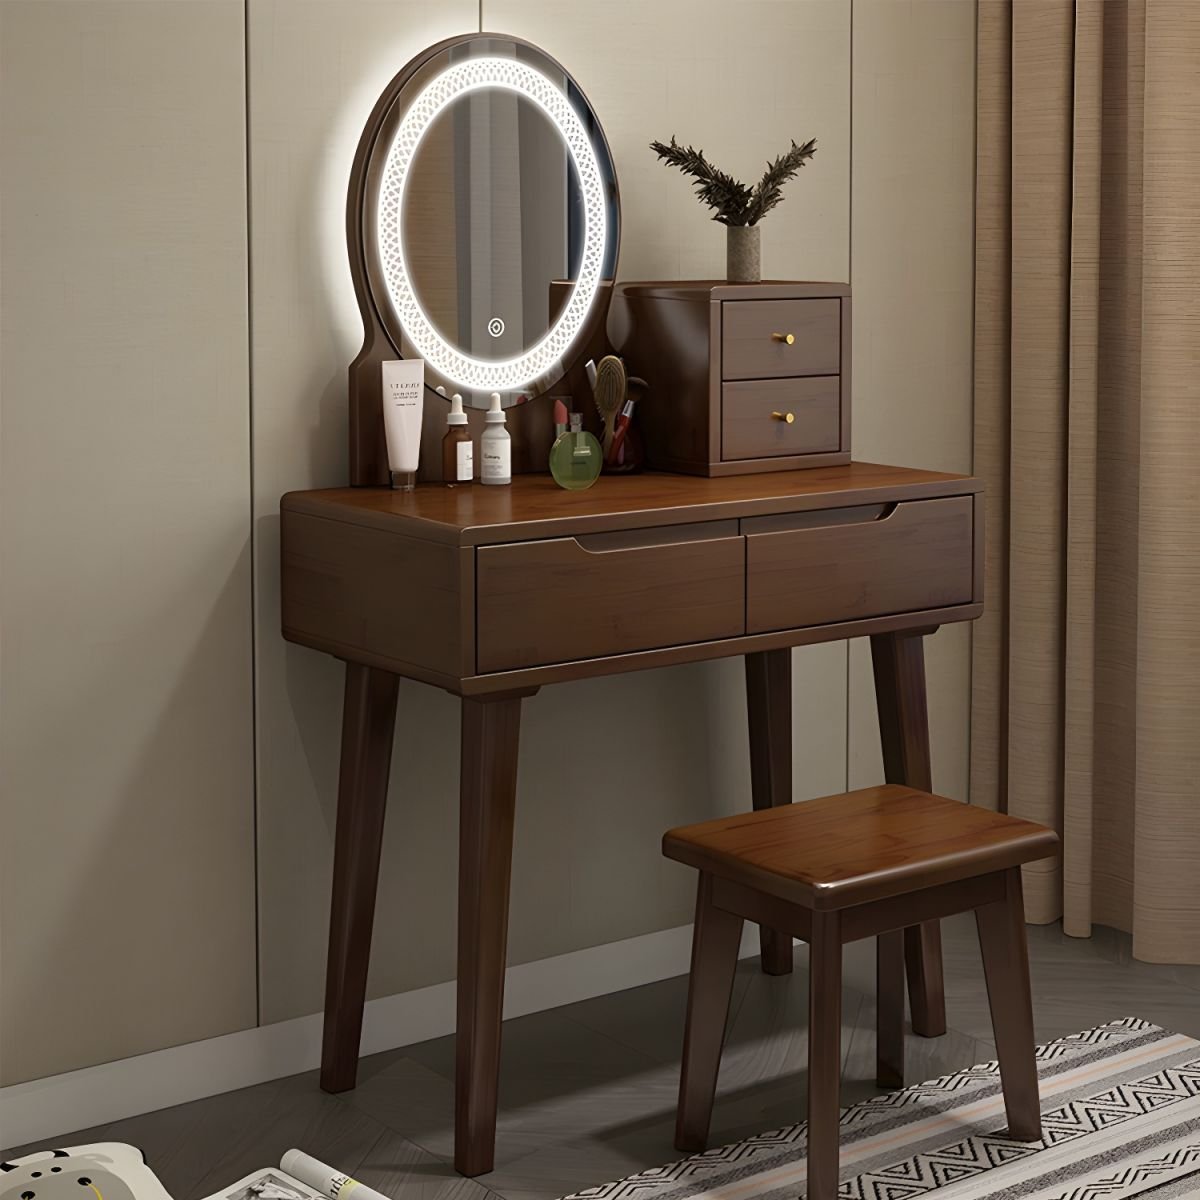 Modern Standard Dressing Table Wood Color Lumber with LED Mirror and Chair, Walnut, Makeup Vanity & Mirror & Stools